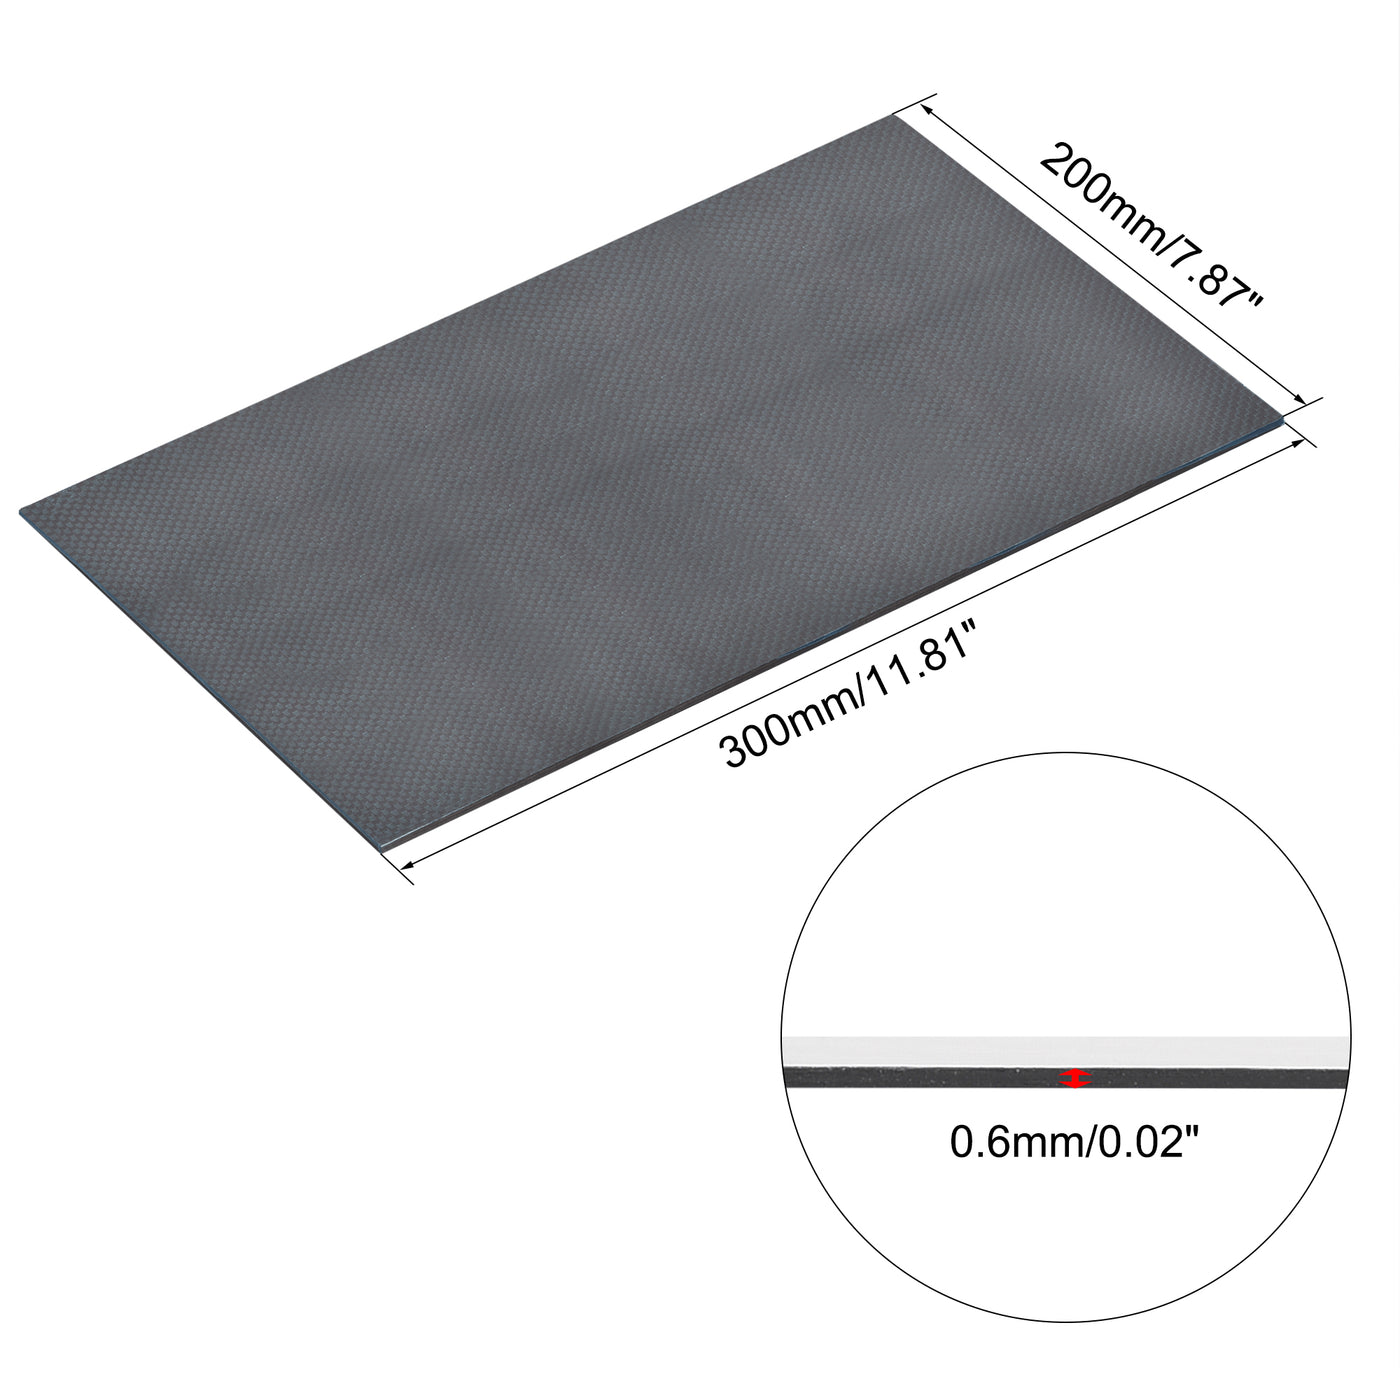 Uxcell Uxcell Carbon Fiber Plate Panel Sheets 300mm x 200mm x 0.6mm (Plain Glossy)